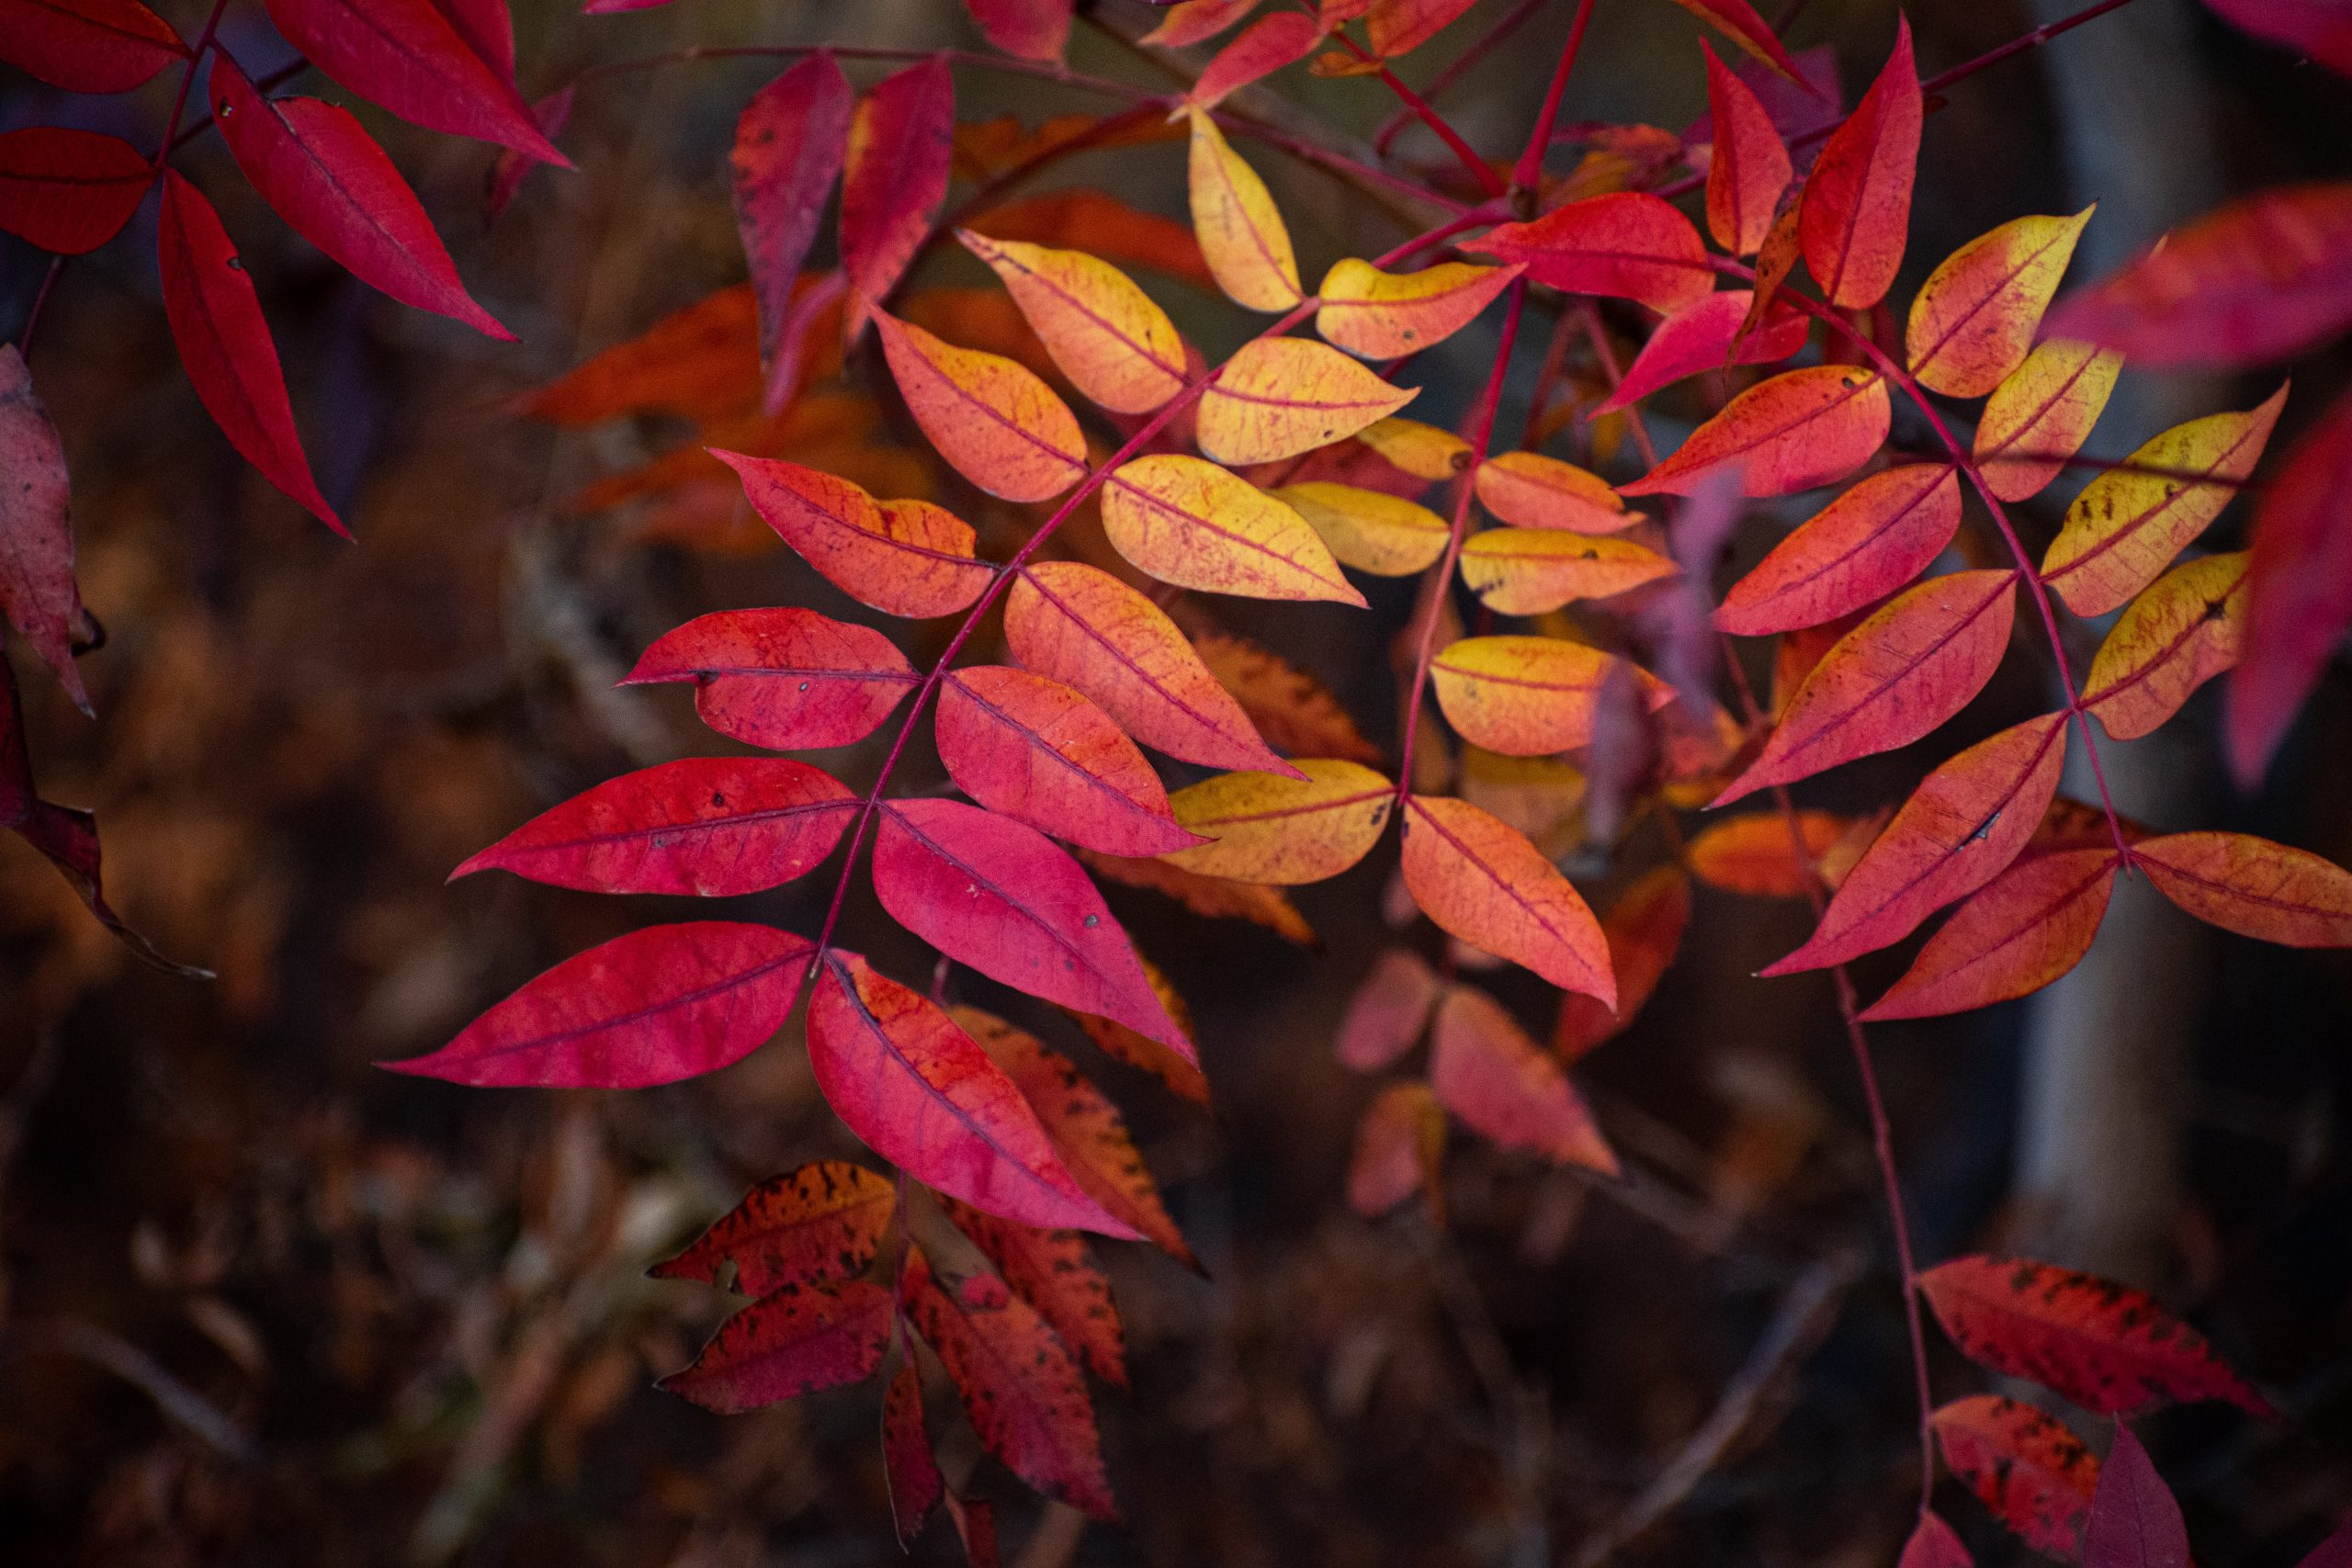 Image of small branches of leaves that are colourful—red, orange, yellow—showing the changing of the season from summer ot fall. Image meant to represent the nature and ecology.